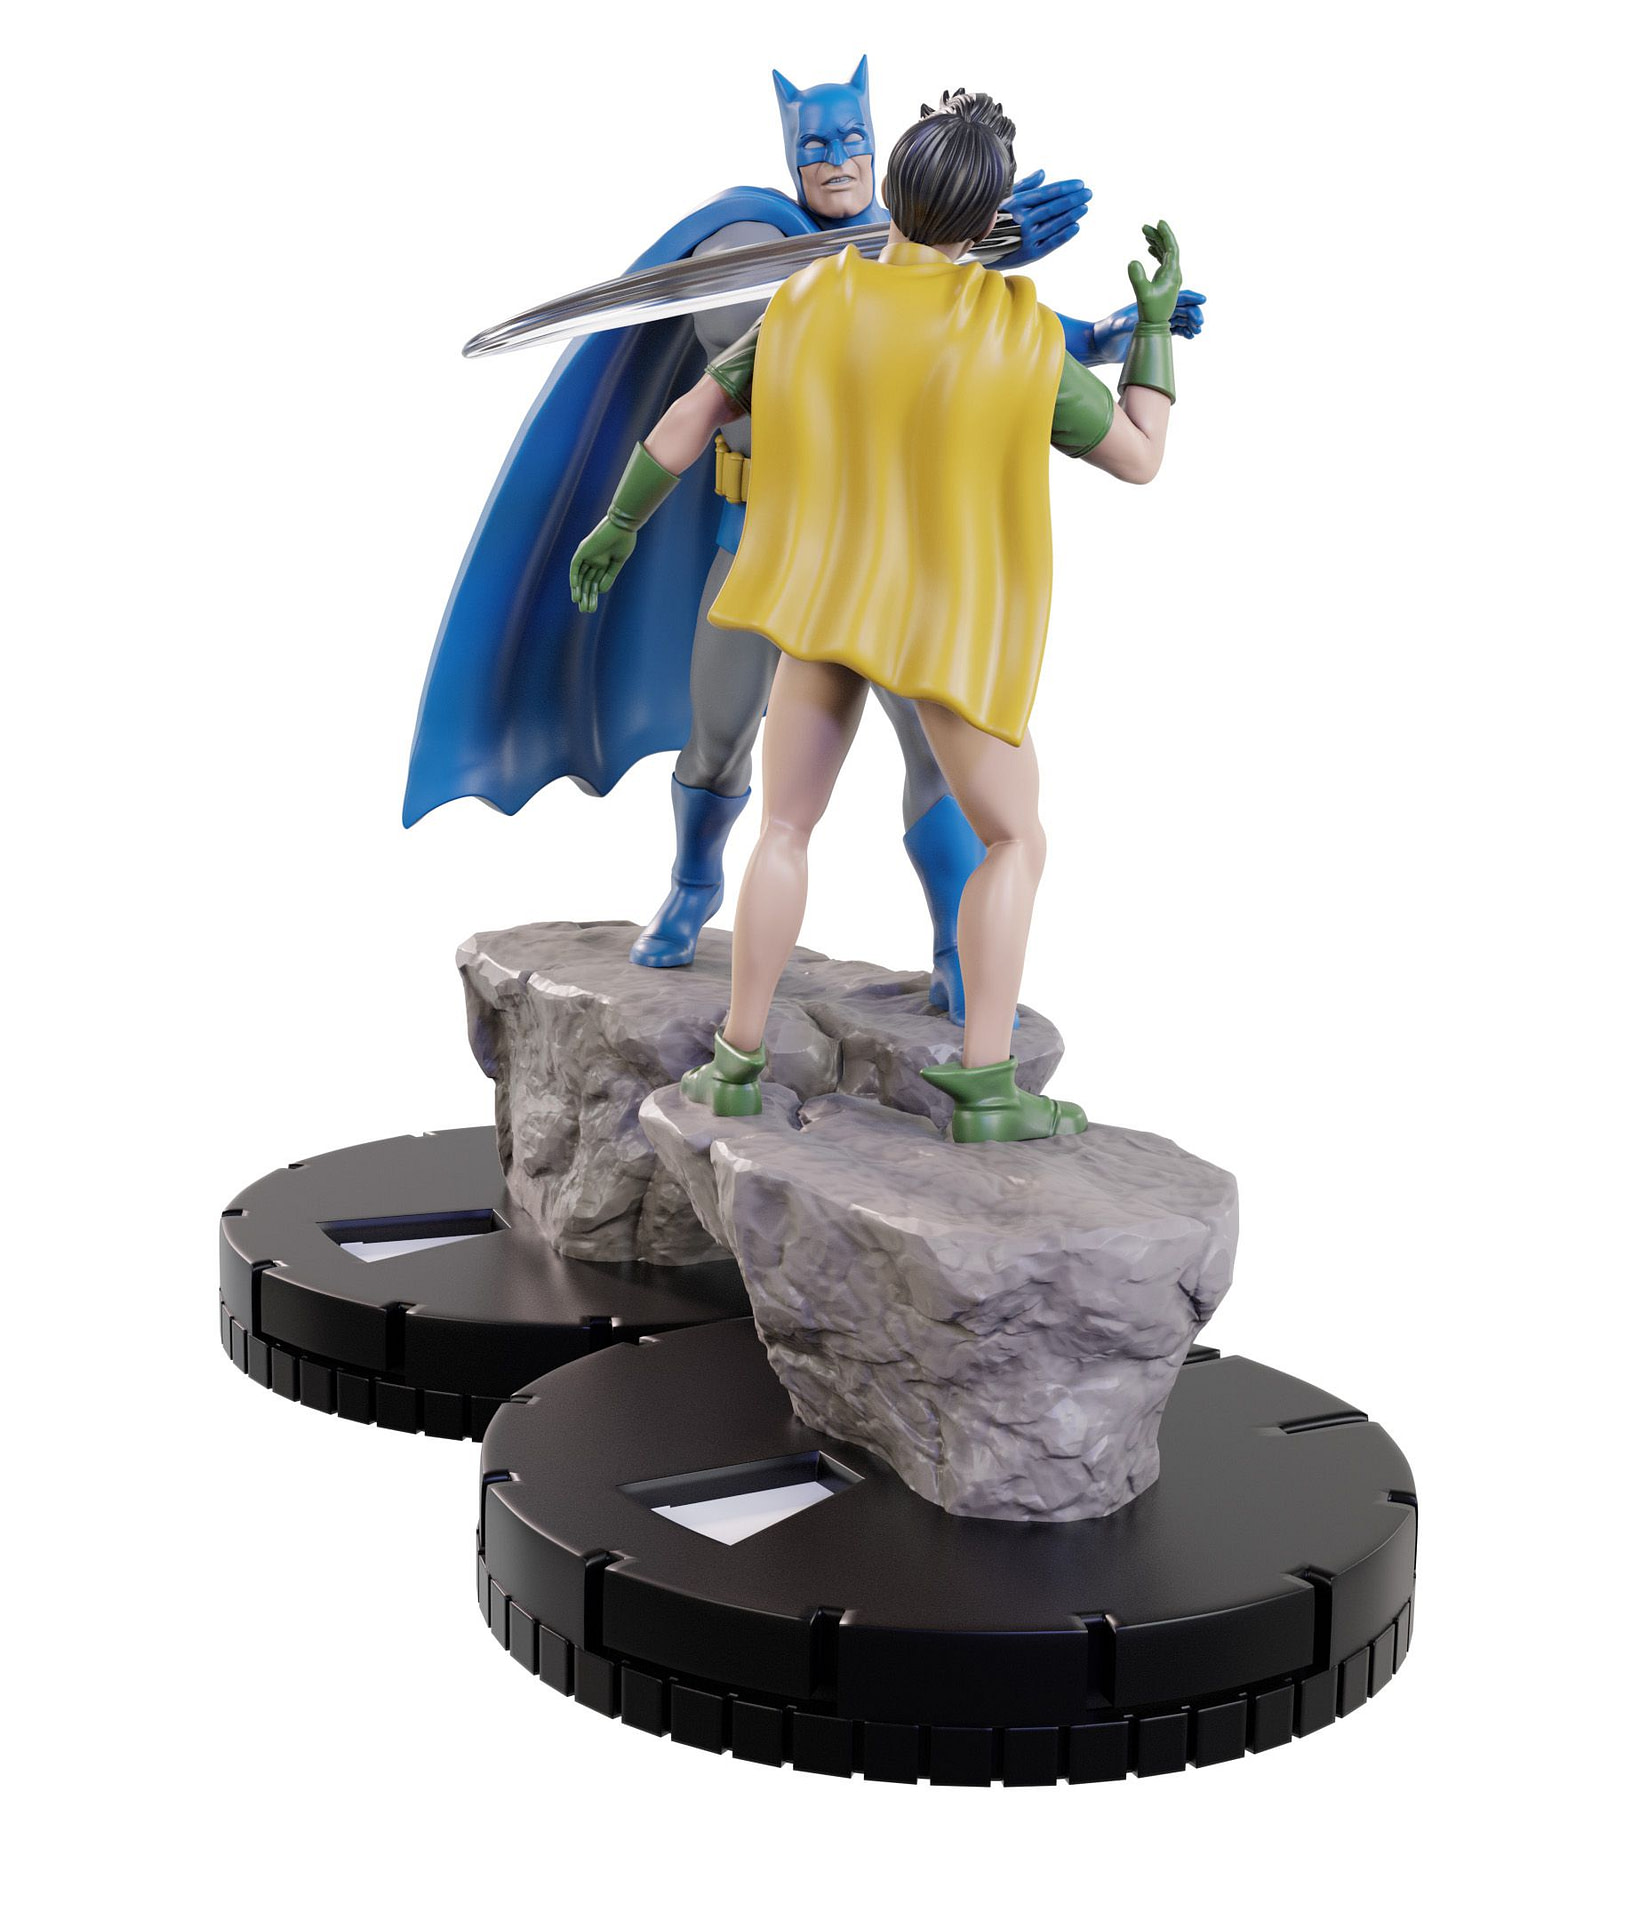 Batman slaps and Thanos snaps in HeroClix’s new line of miniature memes